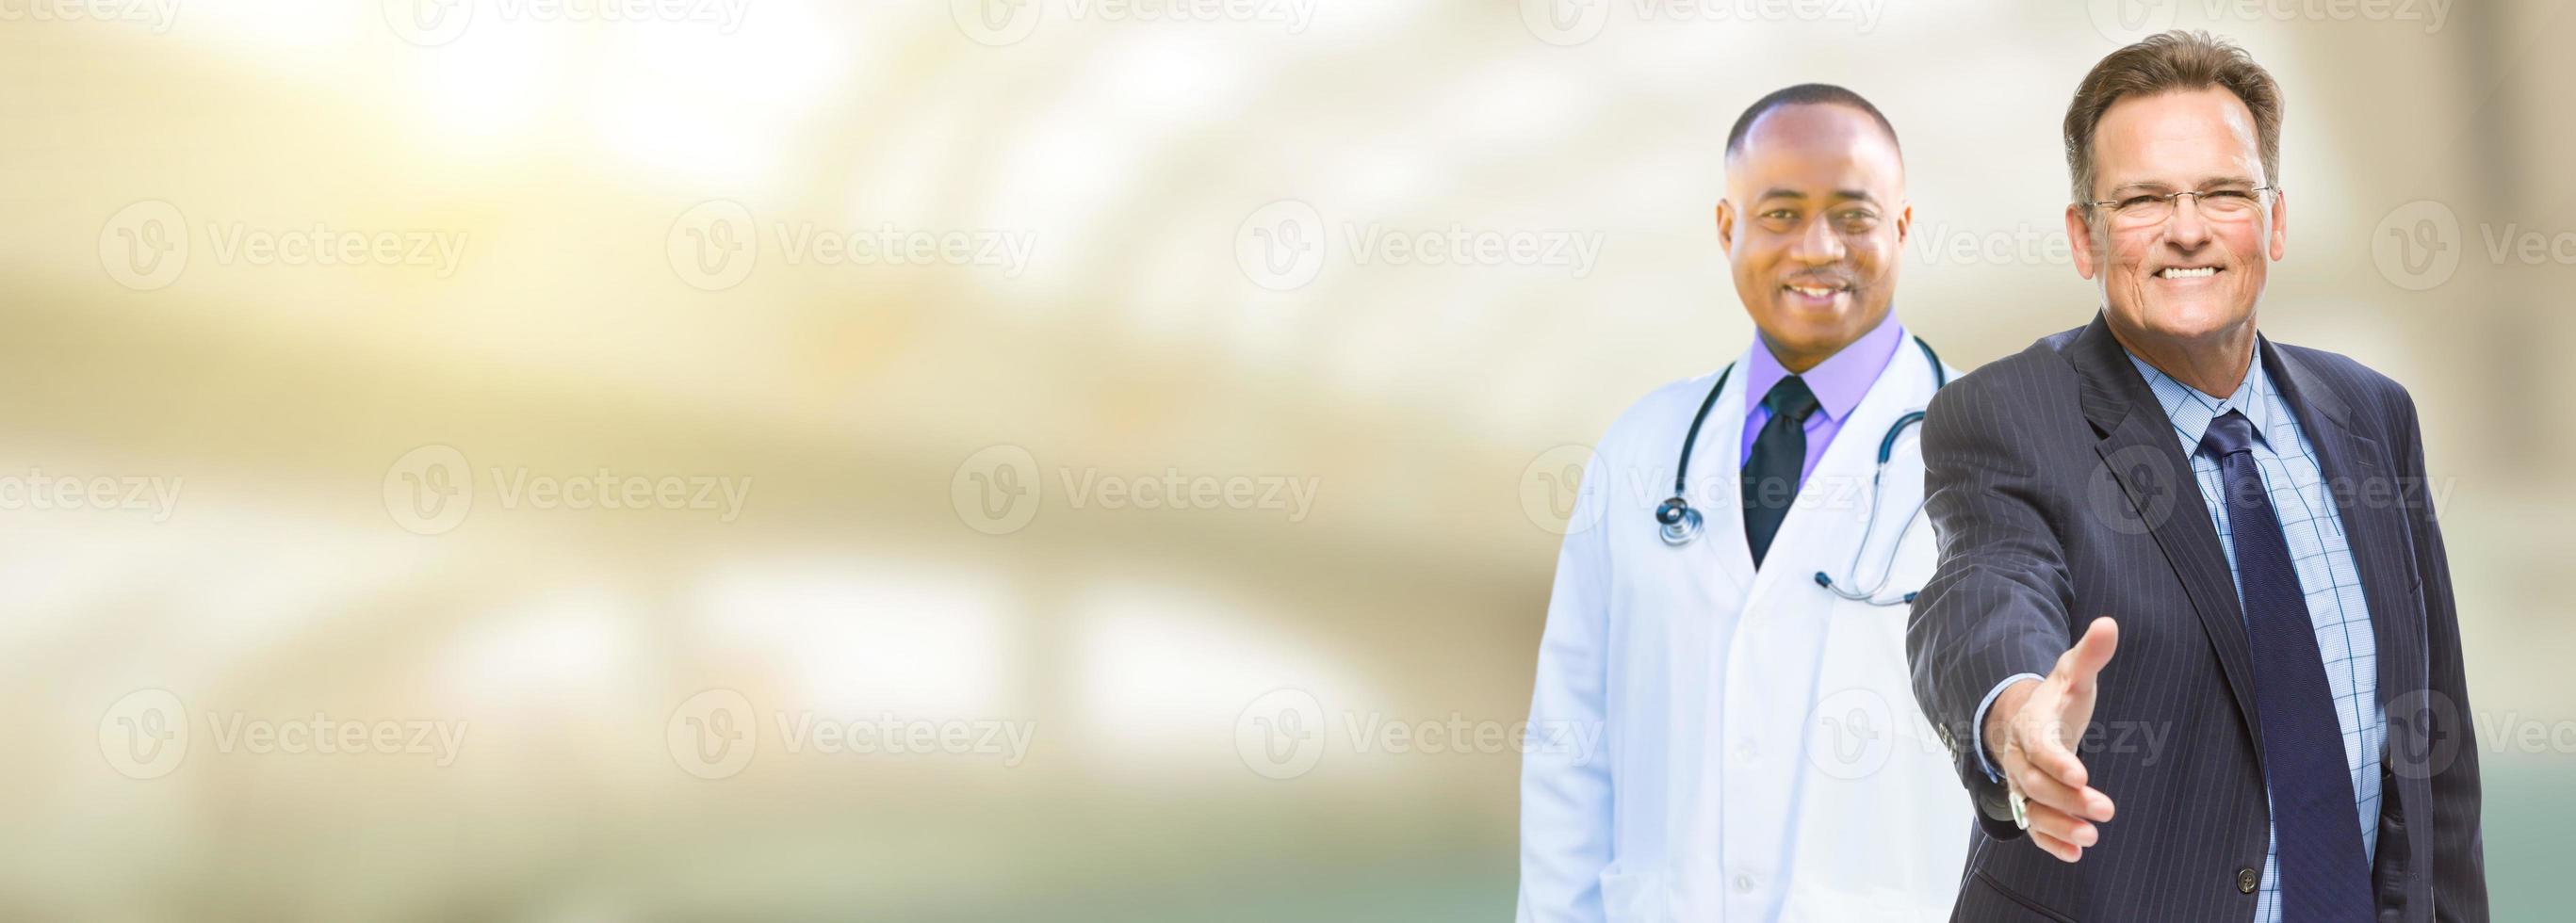 Caucasian Businessman and African American Male Doctor, Nurse or Pharmacist with Room For Text. photo